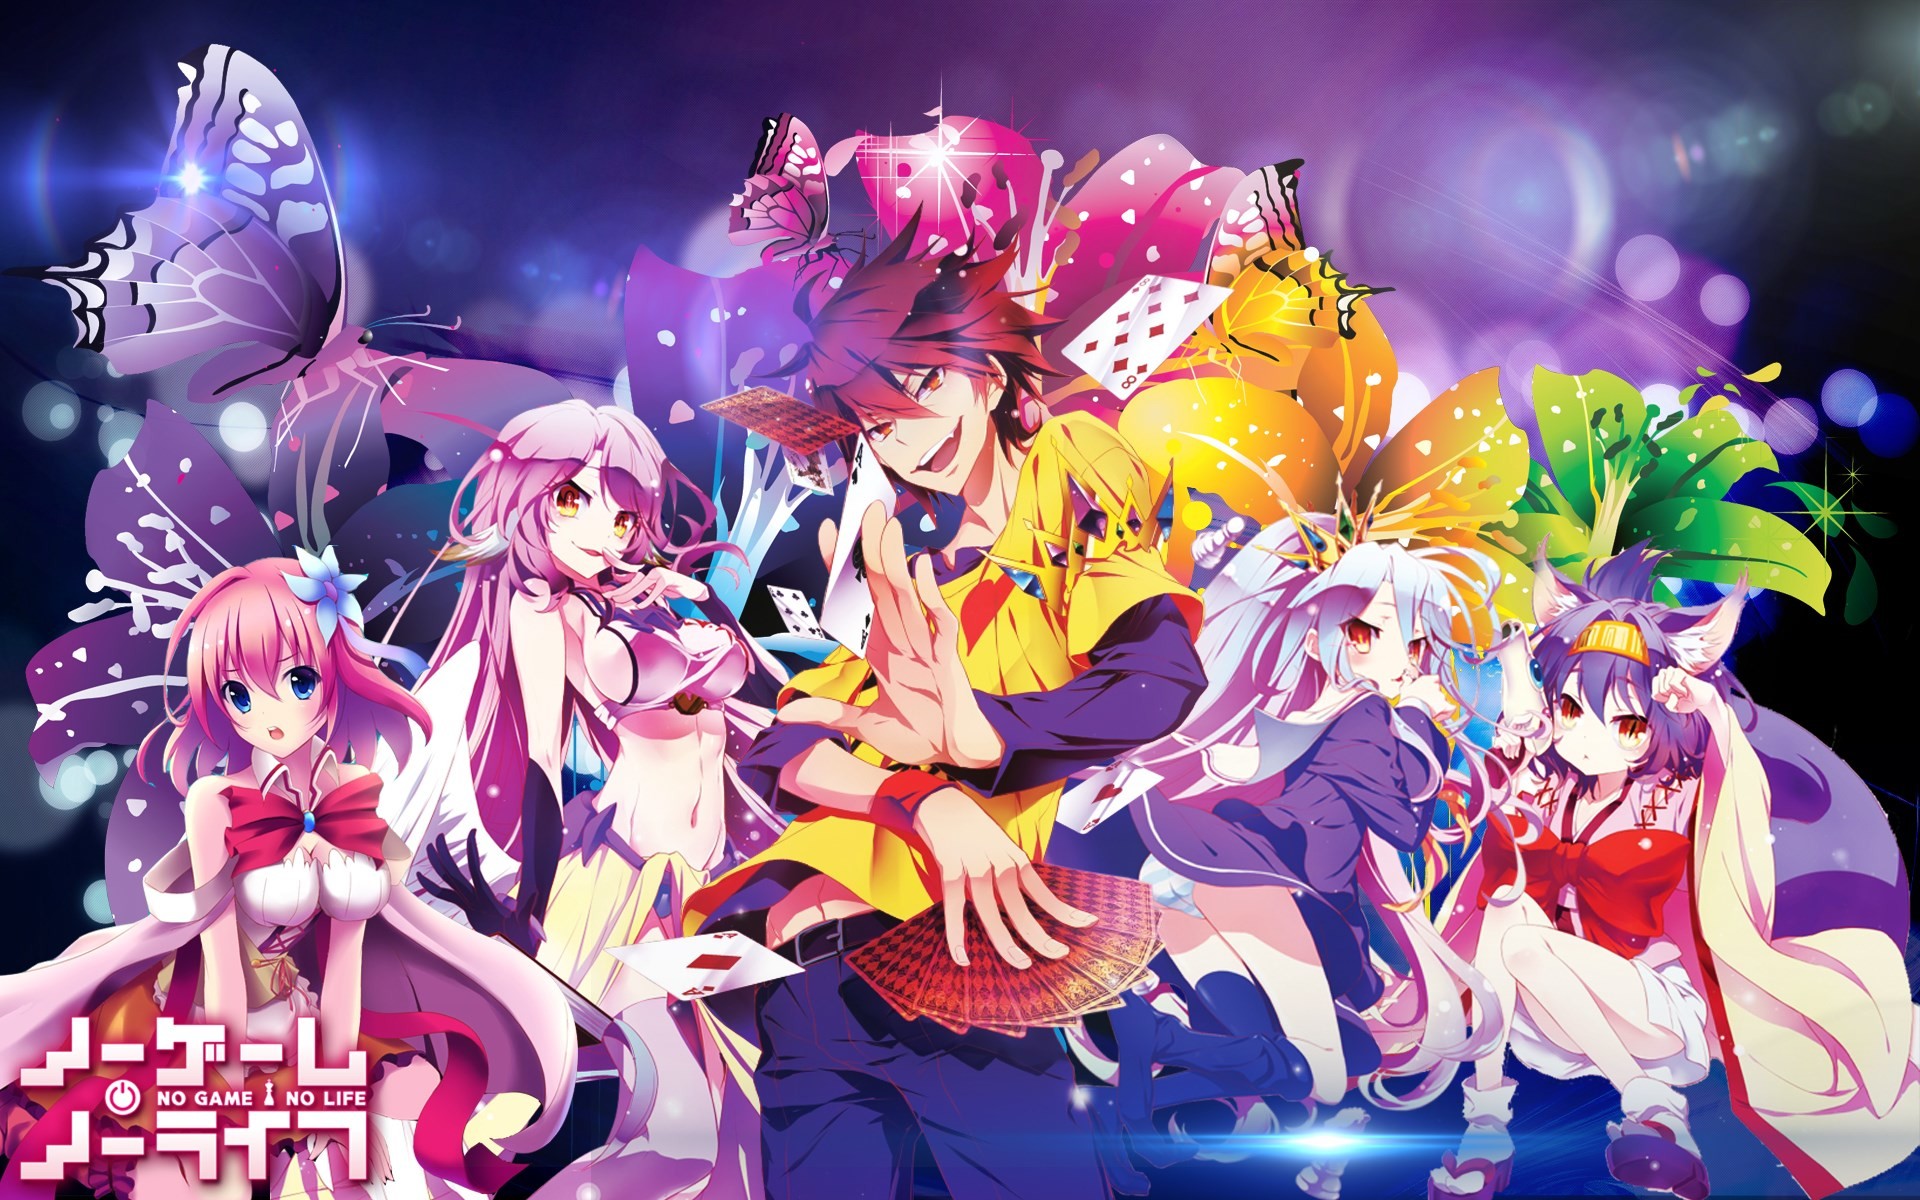 1920x1200 px no game no life images for desktop background by Chapelle  Edwards